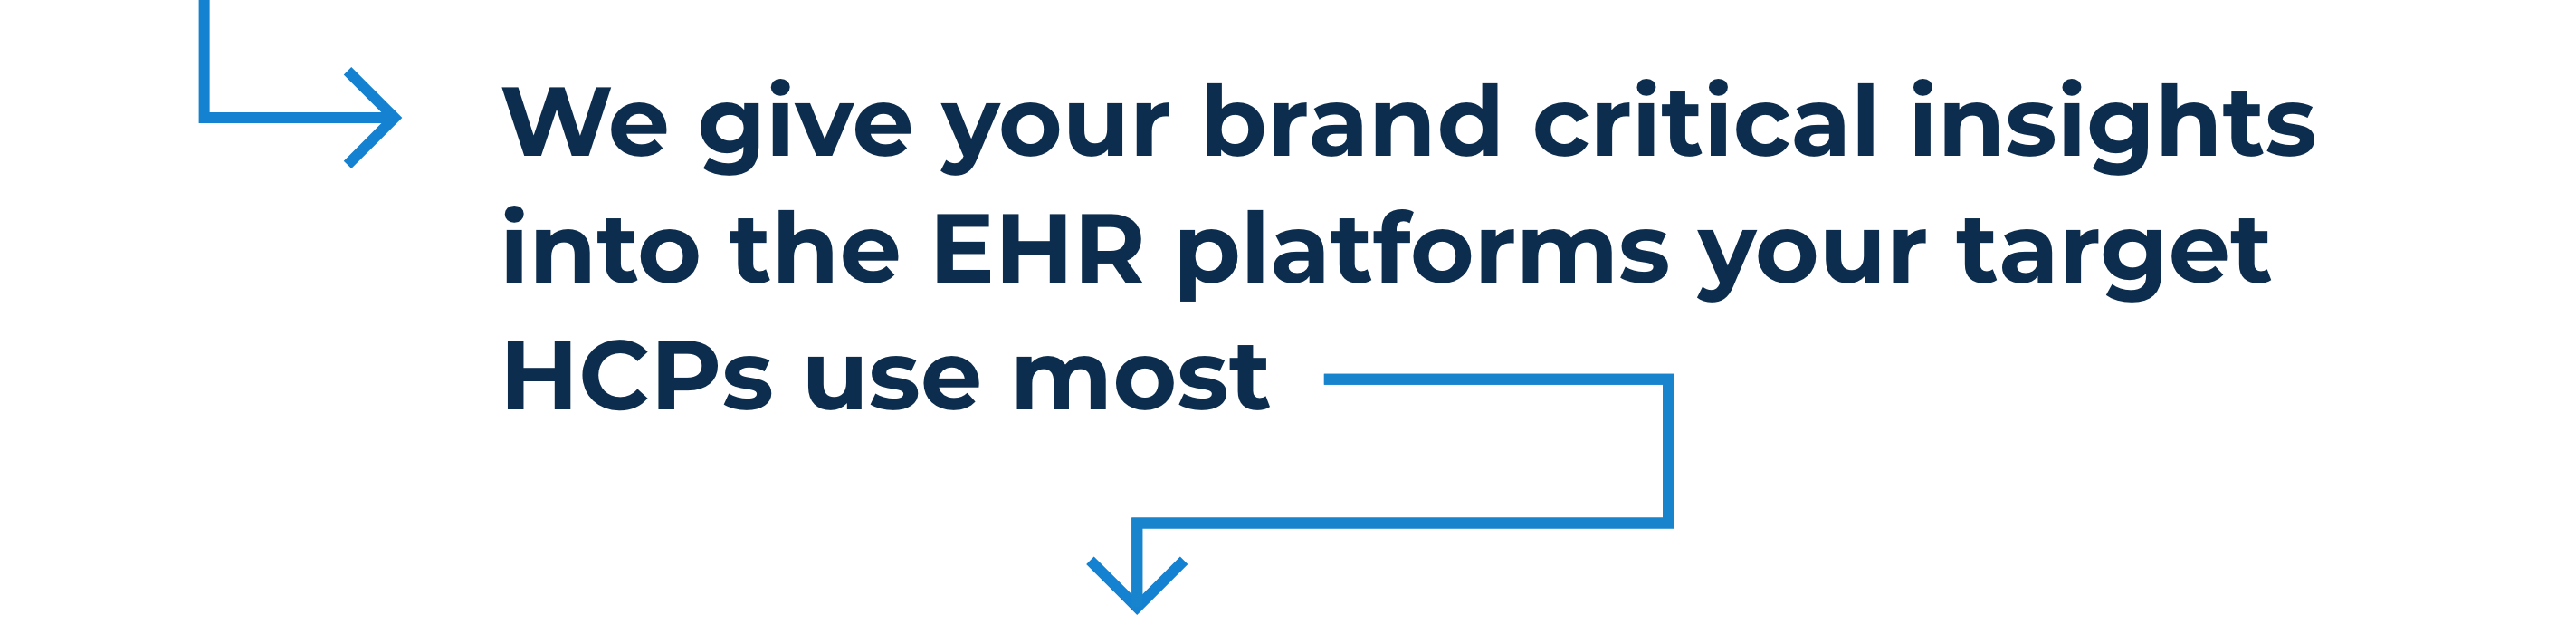 We give your brand critical insights into the EHR platforms your target HCPs use most